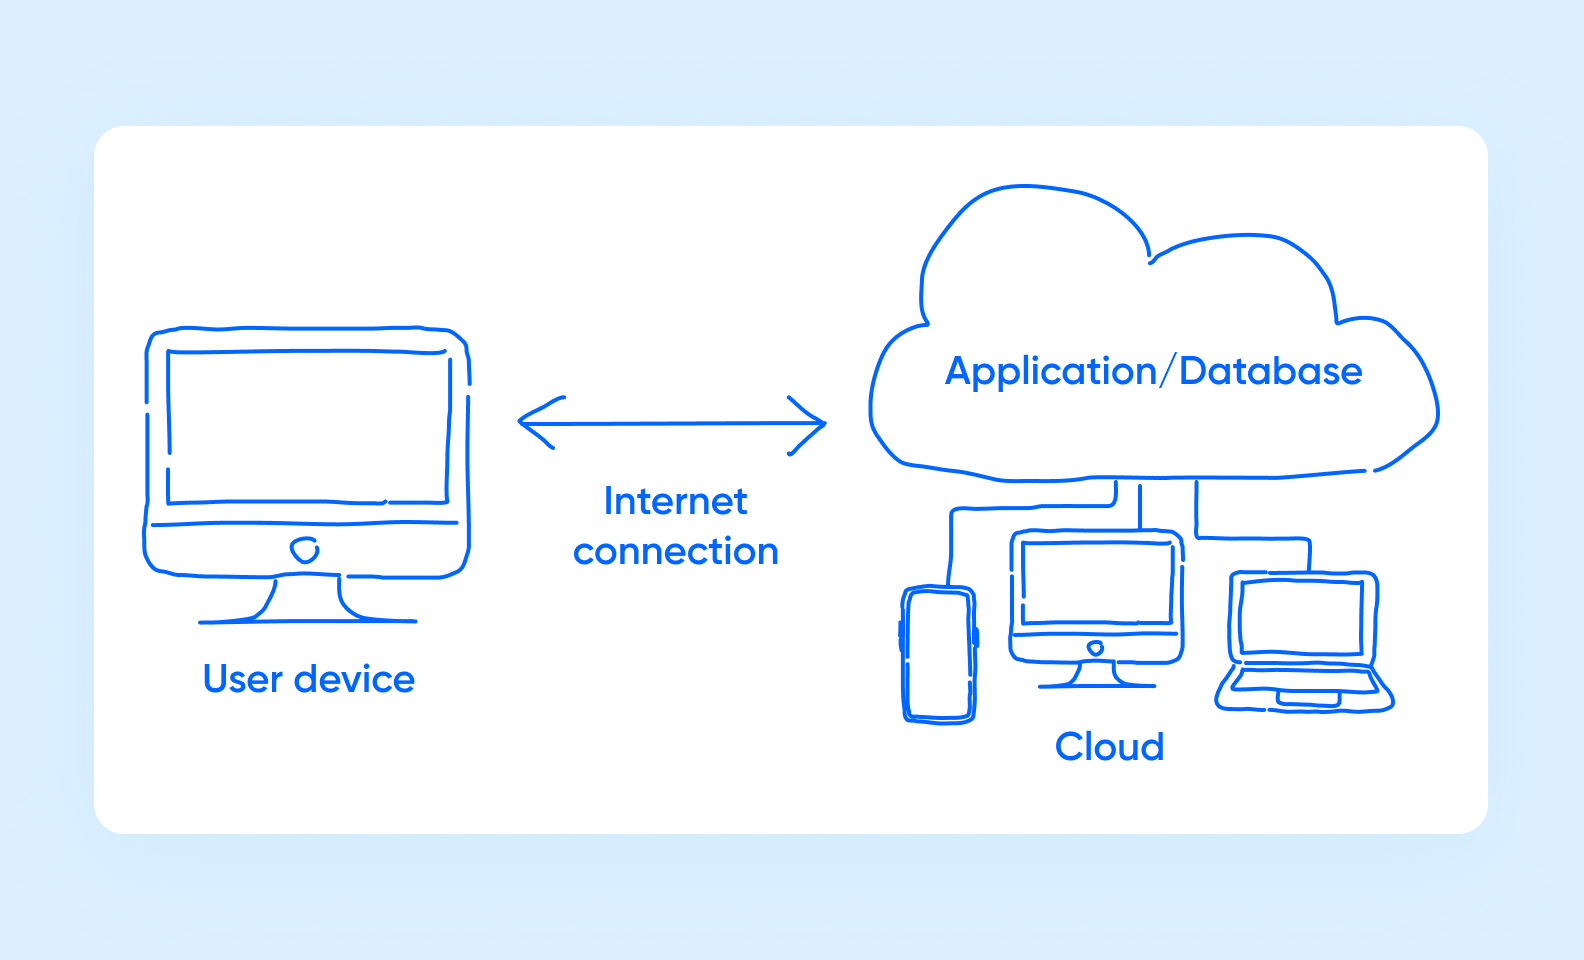 A scheme showing the basics of cloud computing